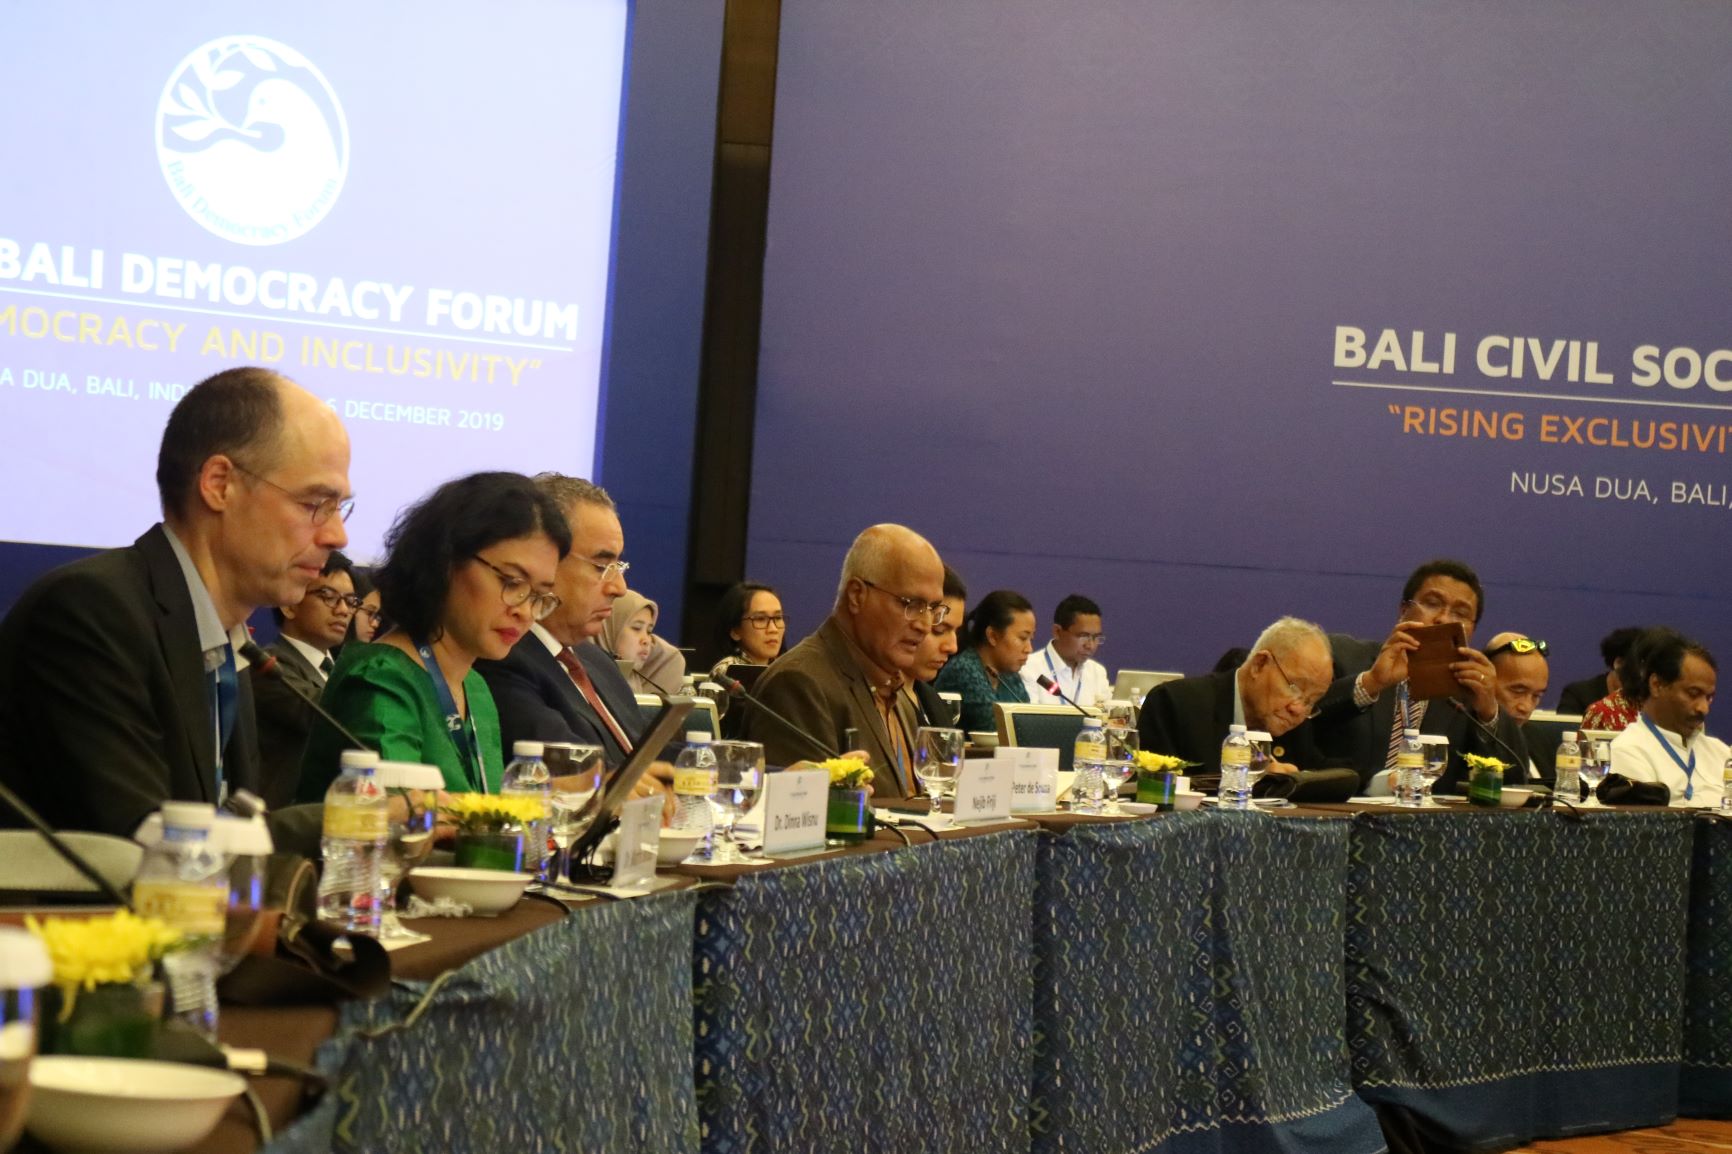 International IDEA's Martin Brusis and Prof Peter deSouza discusses the GSoD at the Bali Civil Society and Media Forum, one of the sessions at the 12th Bali Democracy Forum. Image credit: International IDEA